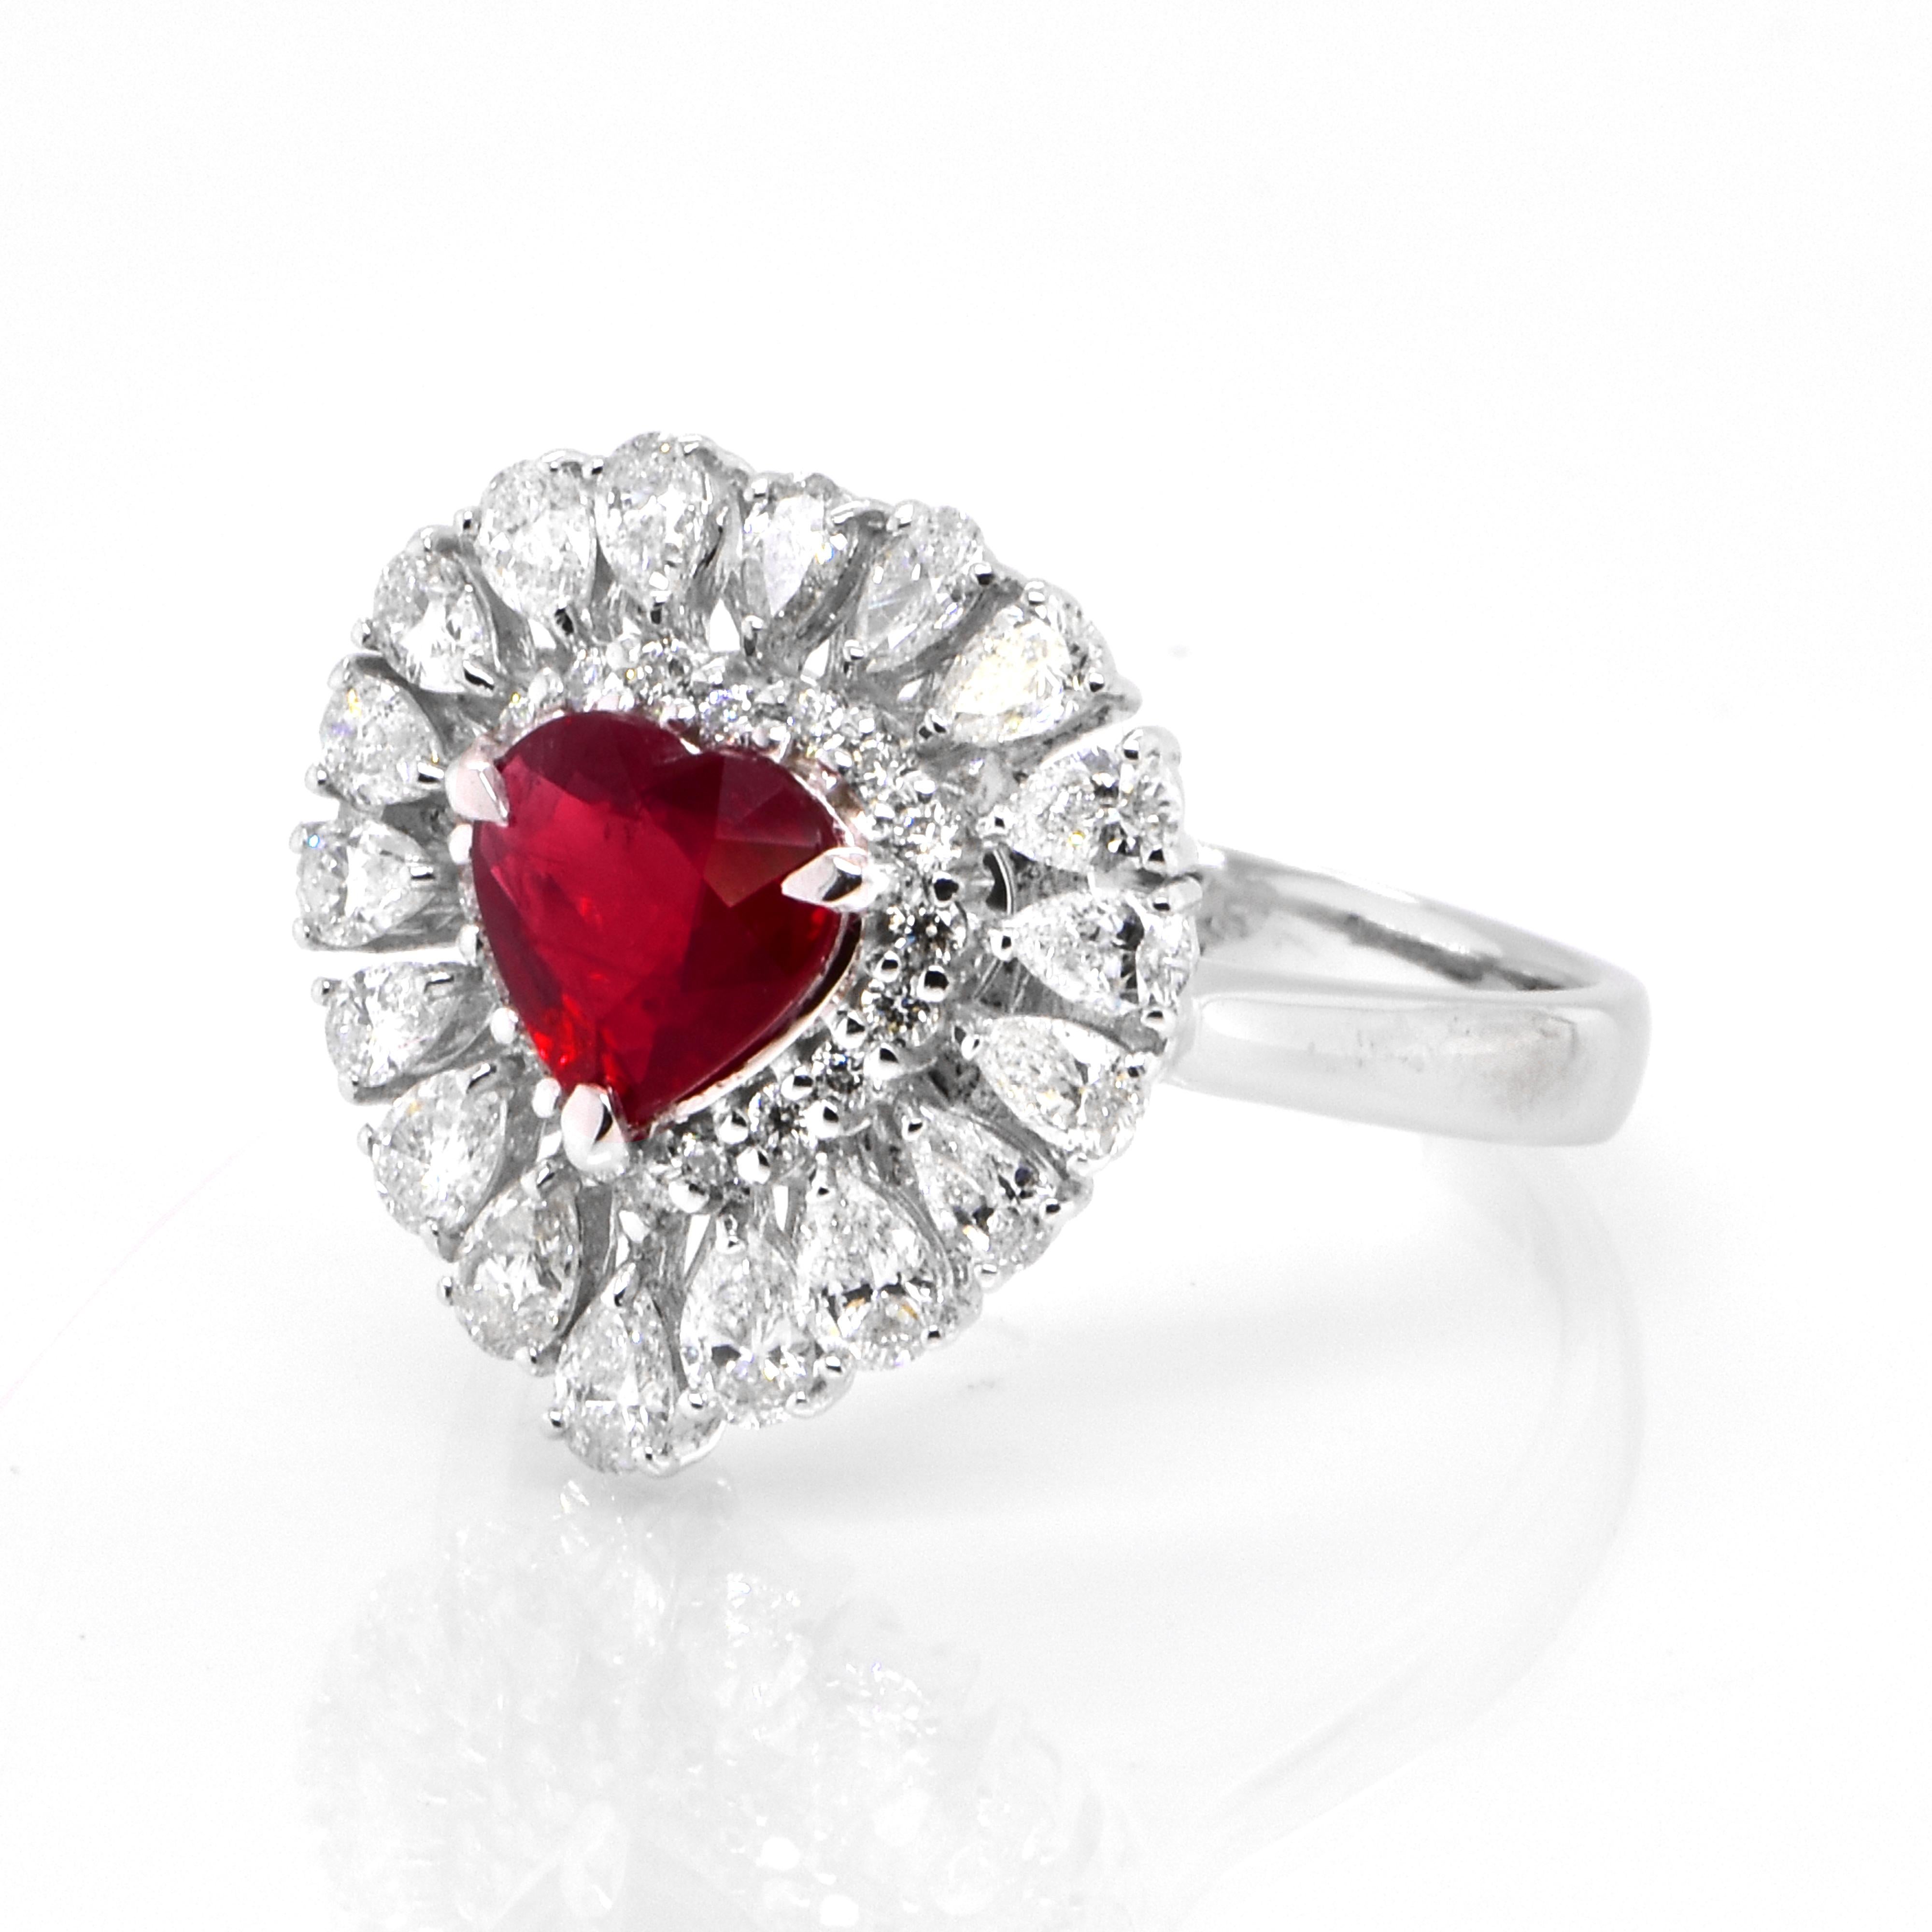 A beautiful Ring set in Platinum featuring a GIA Certified 1.01 Carat Natural, Pigeons Blood Red, Burmese Ruby and 1.08 Carat Diamonds. Rubies are referred to as 